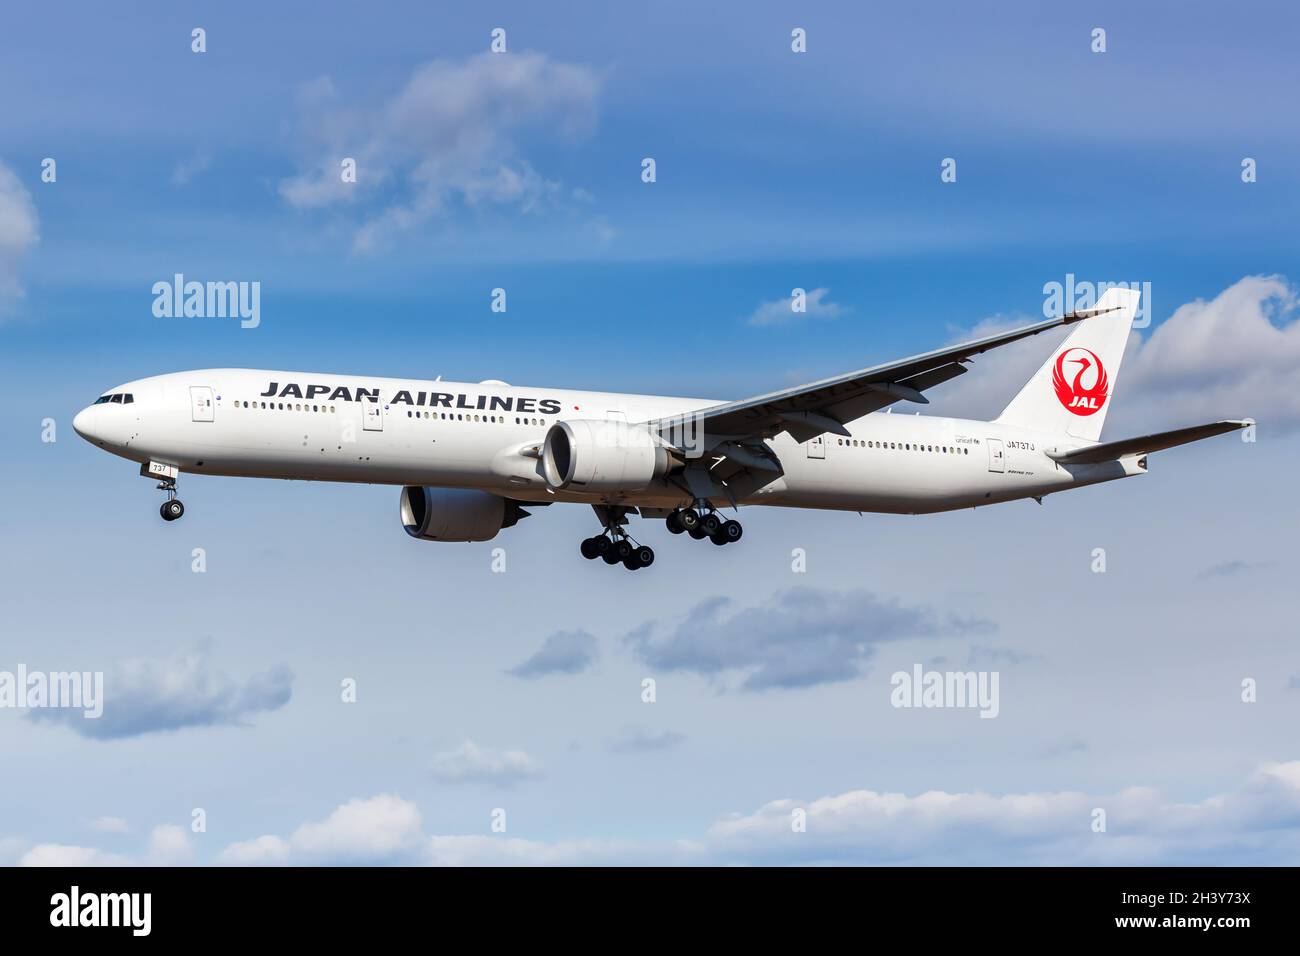 Japan Airlines Boeing 777-300ER Aircraft New York JFK Airport Stock Photo